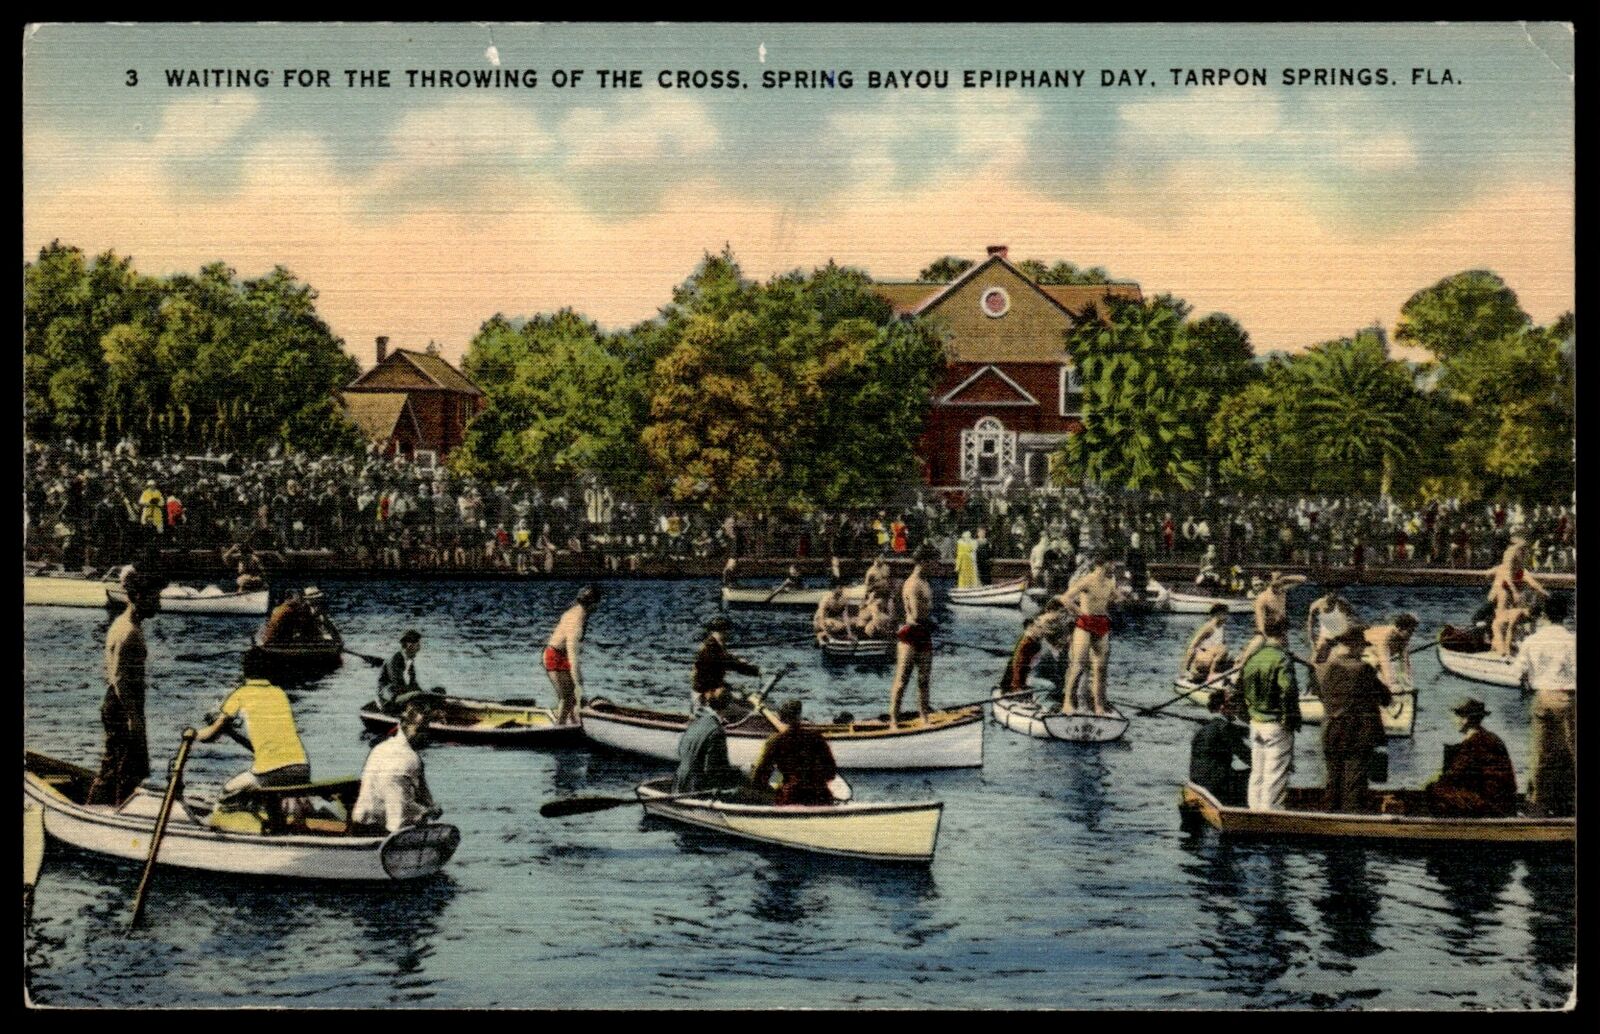 1930 Postcard Trapon Springs Florida Epiphany Day Throwing of the Cross Postcard